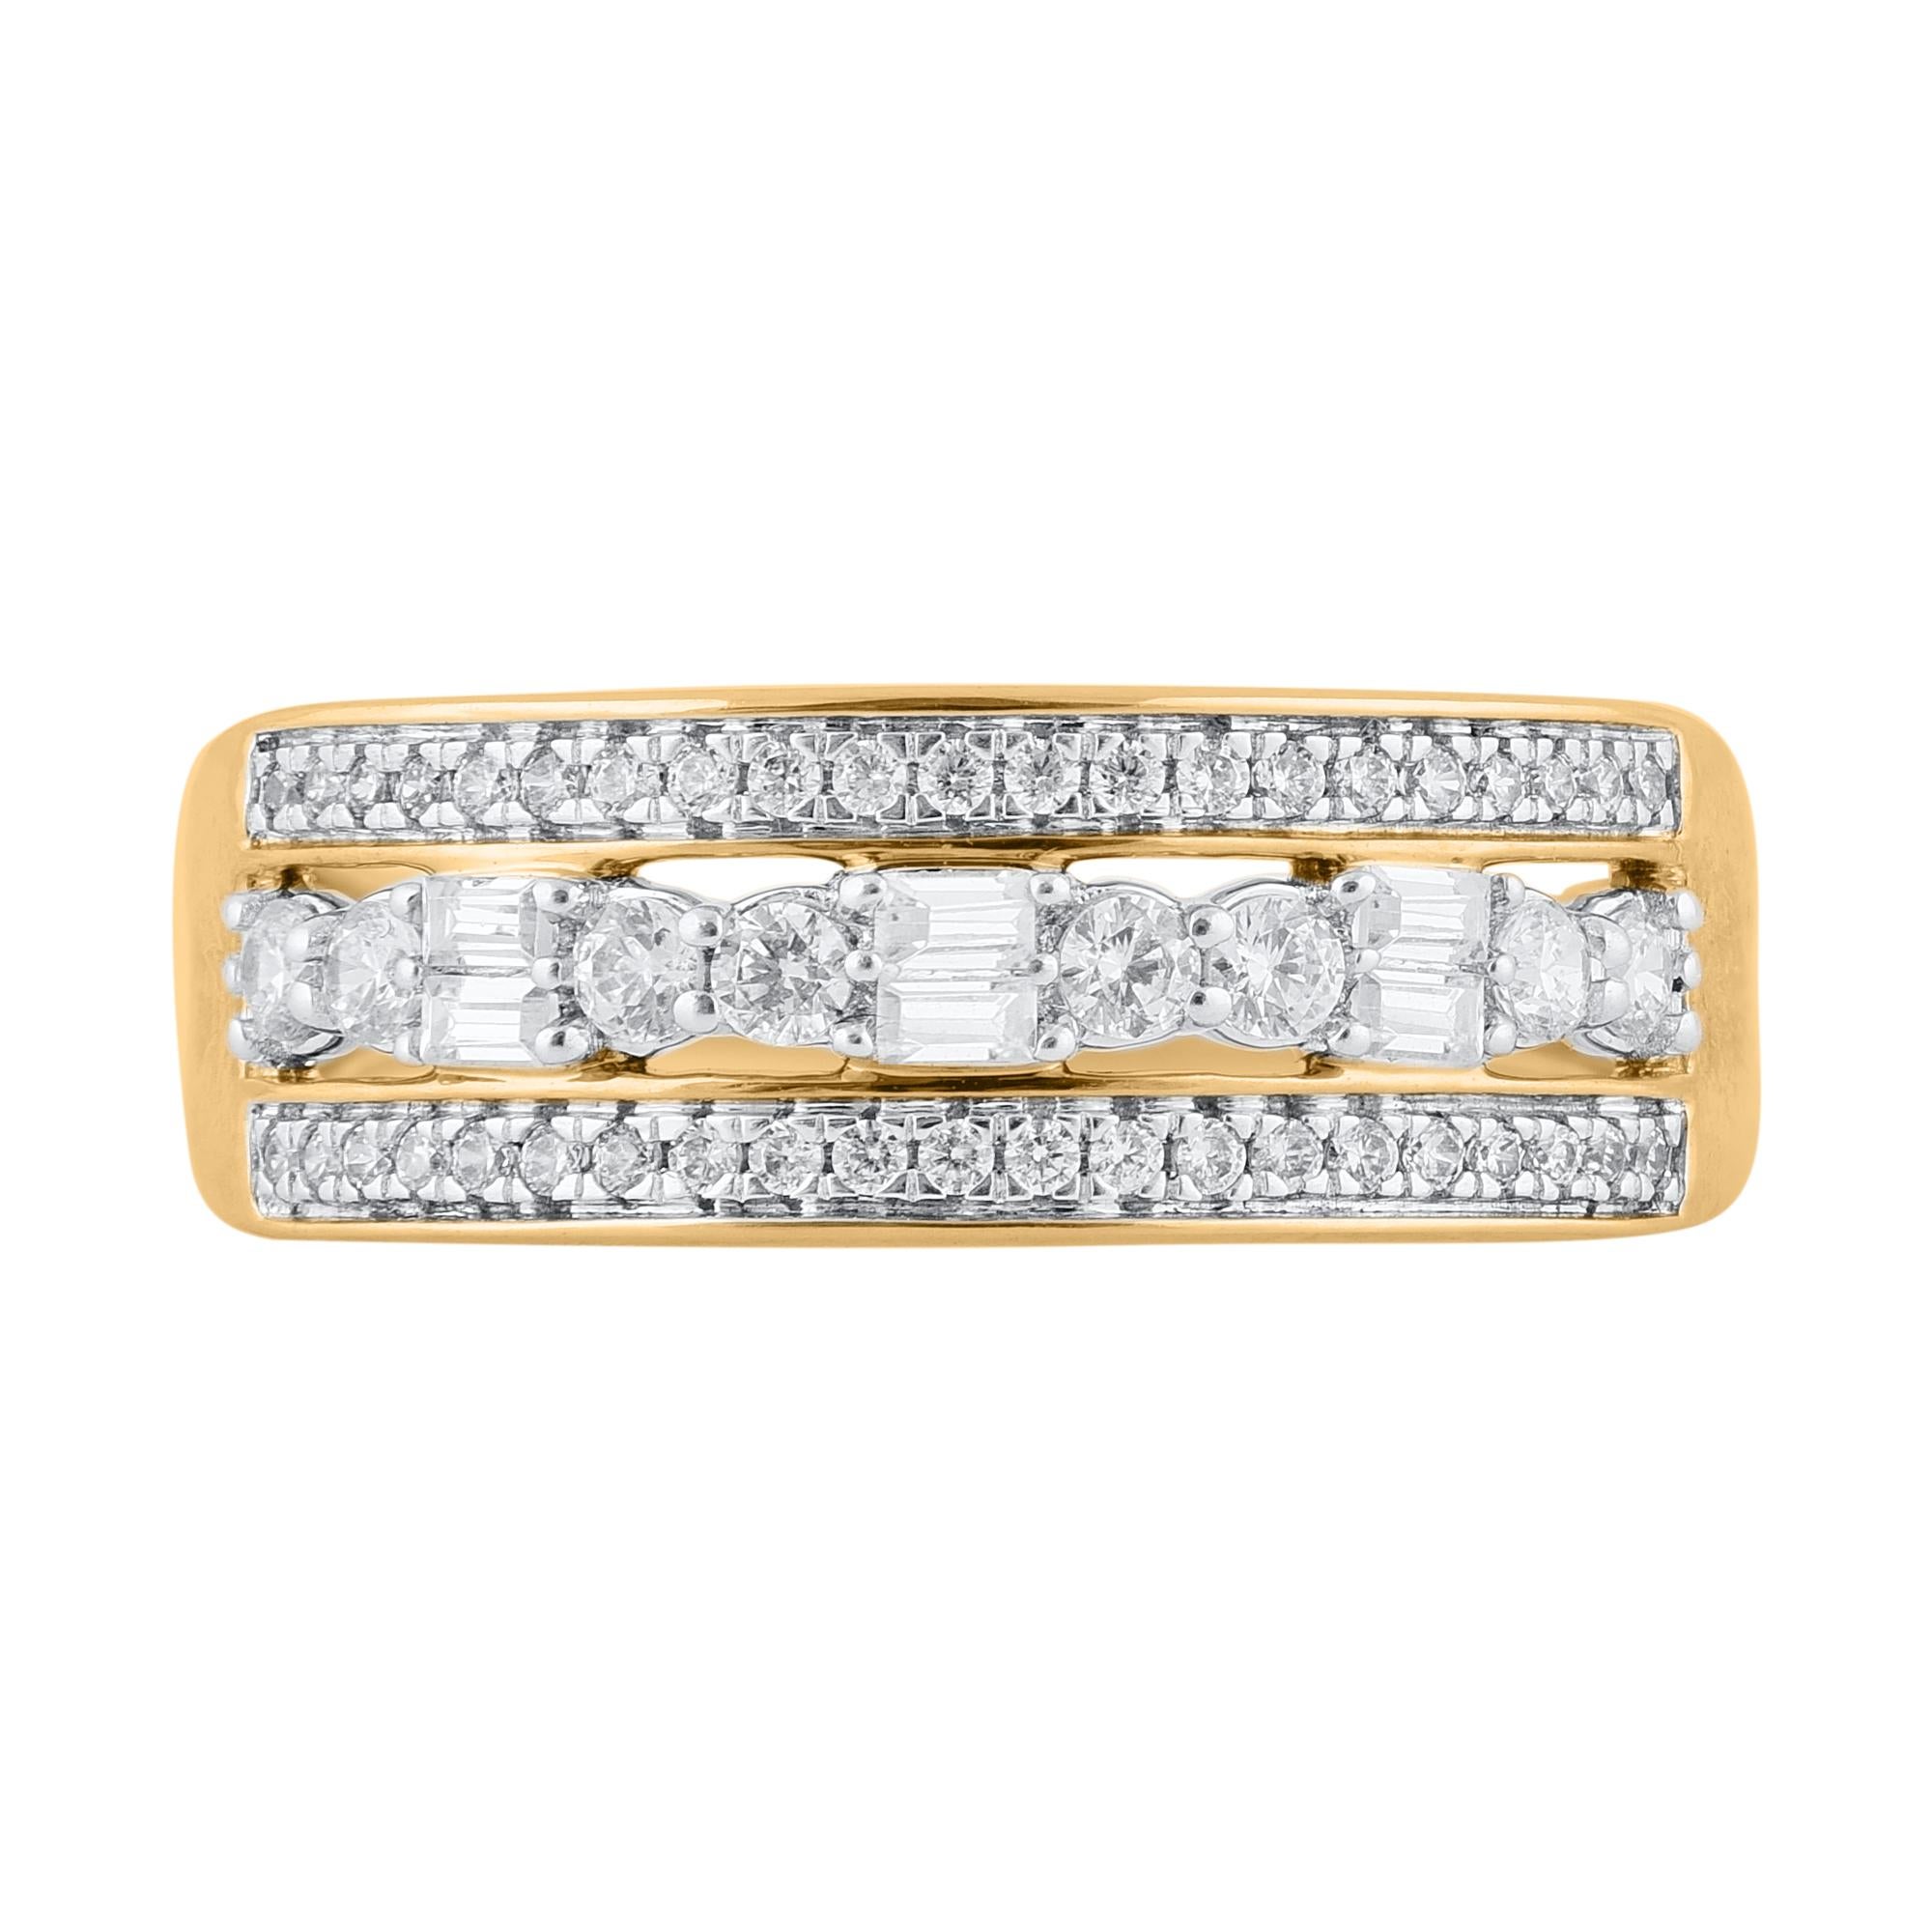 Contemporary TJD 0.50 Carat Round & Baguette Diamond 18KT Yellow Gold Wedding Band Ring For Sale